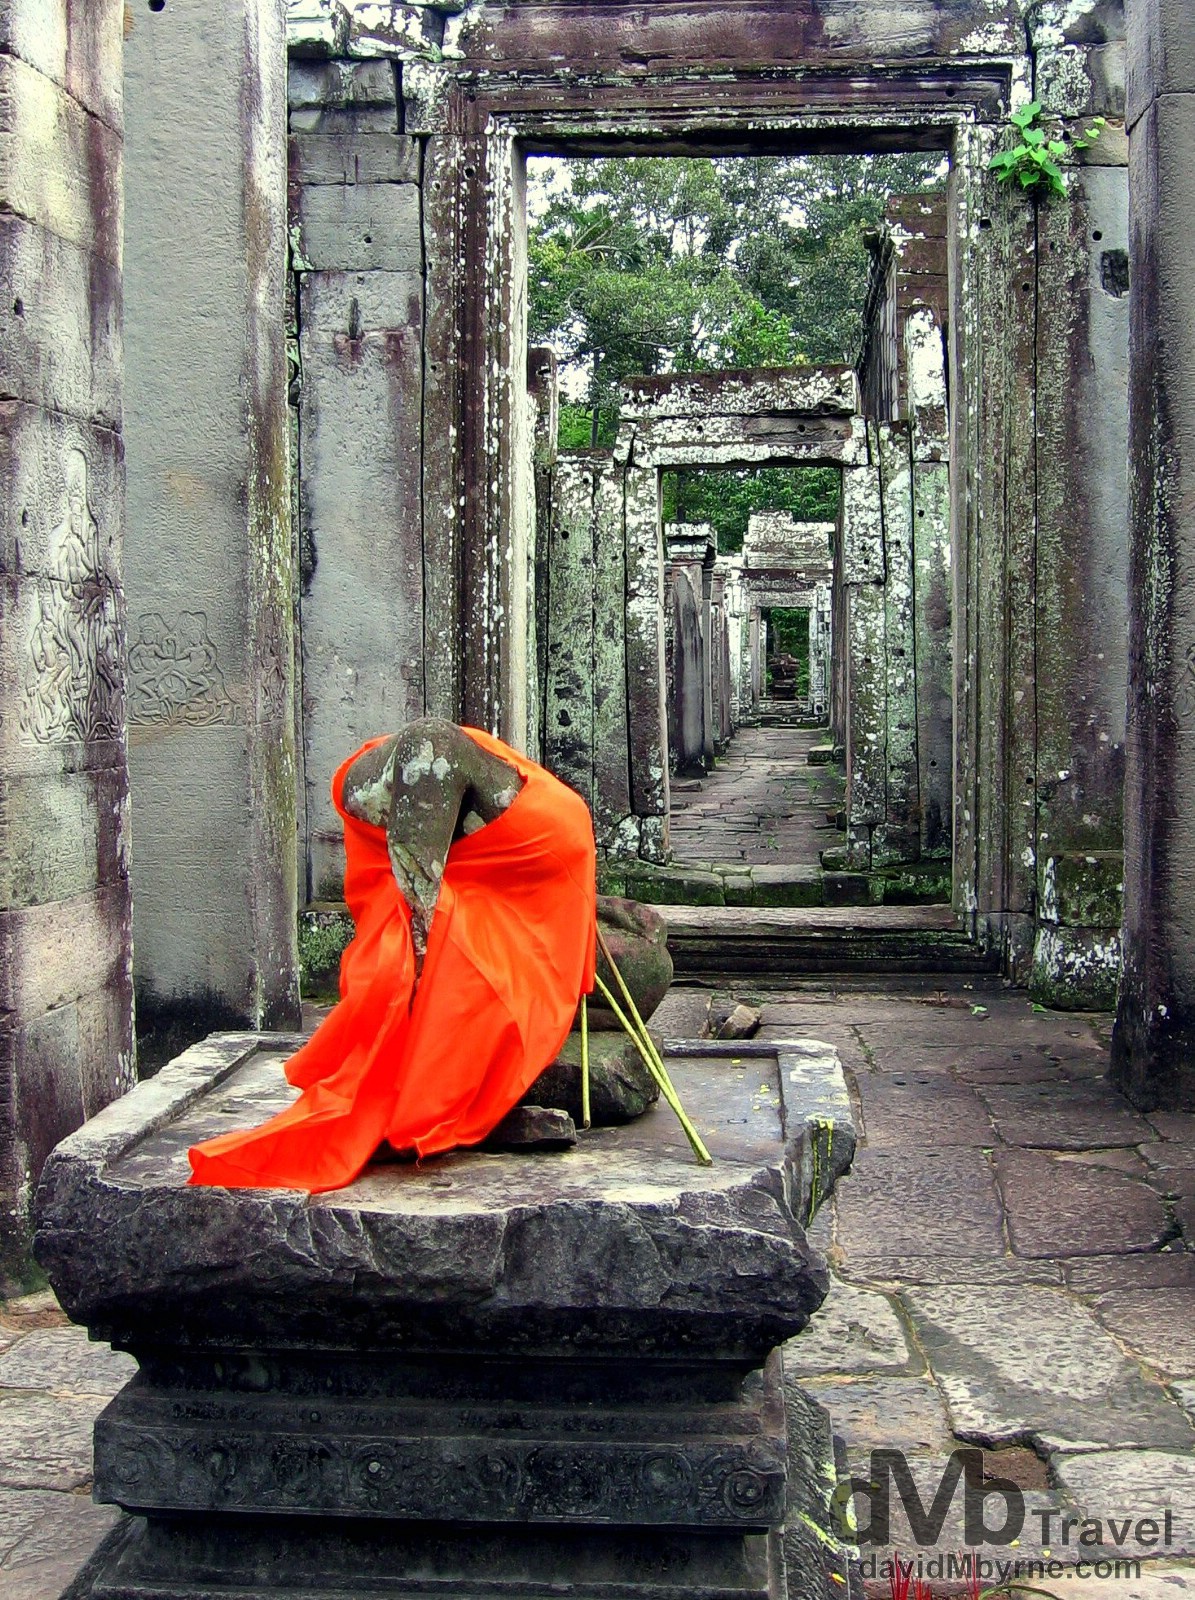 A headless Buddha in the ruins of the temples of Angkor, Cambodia. September 20th, 2005. 